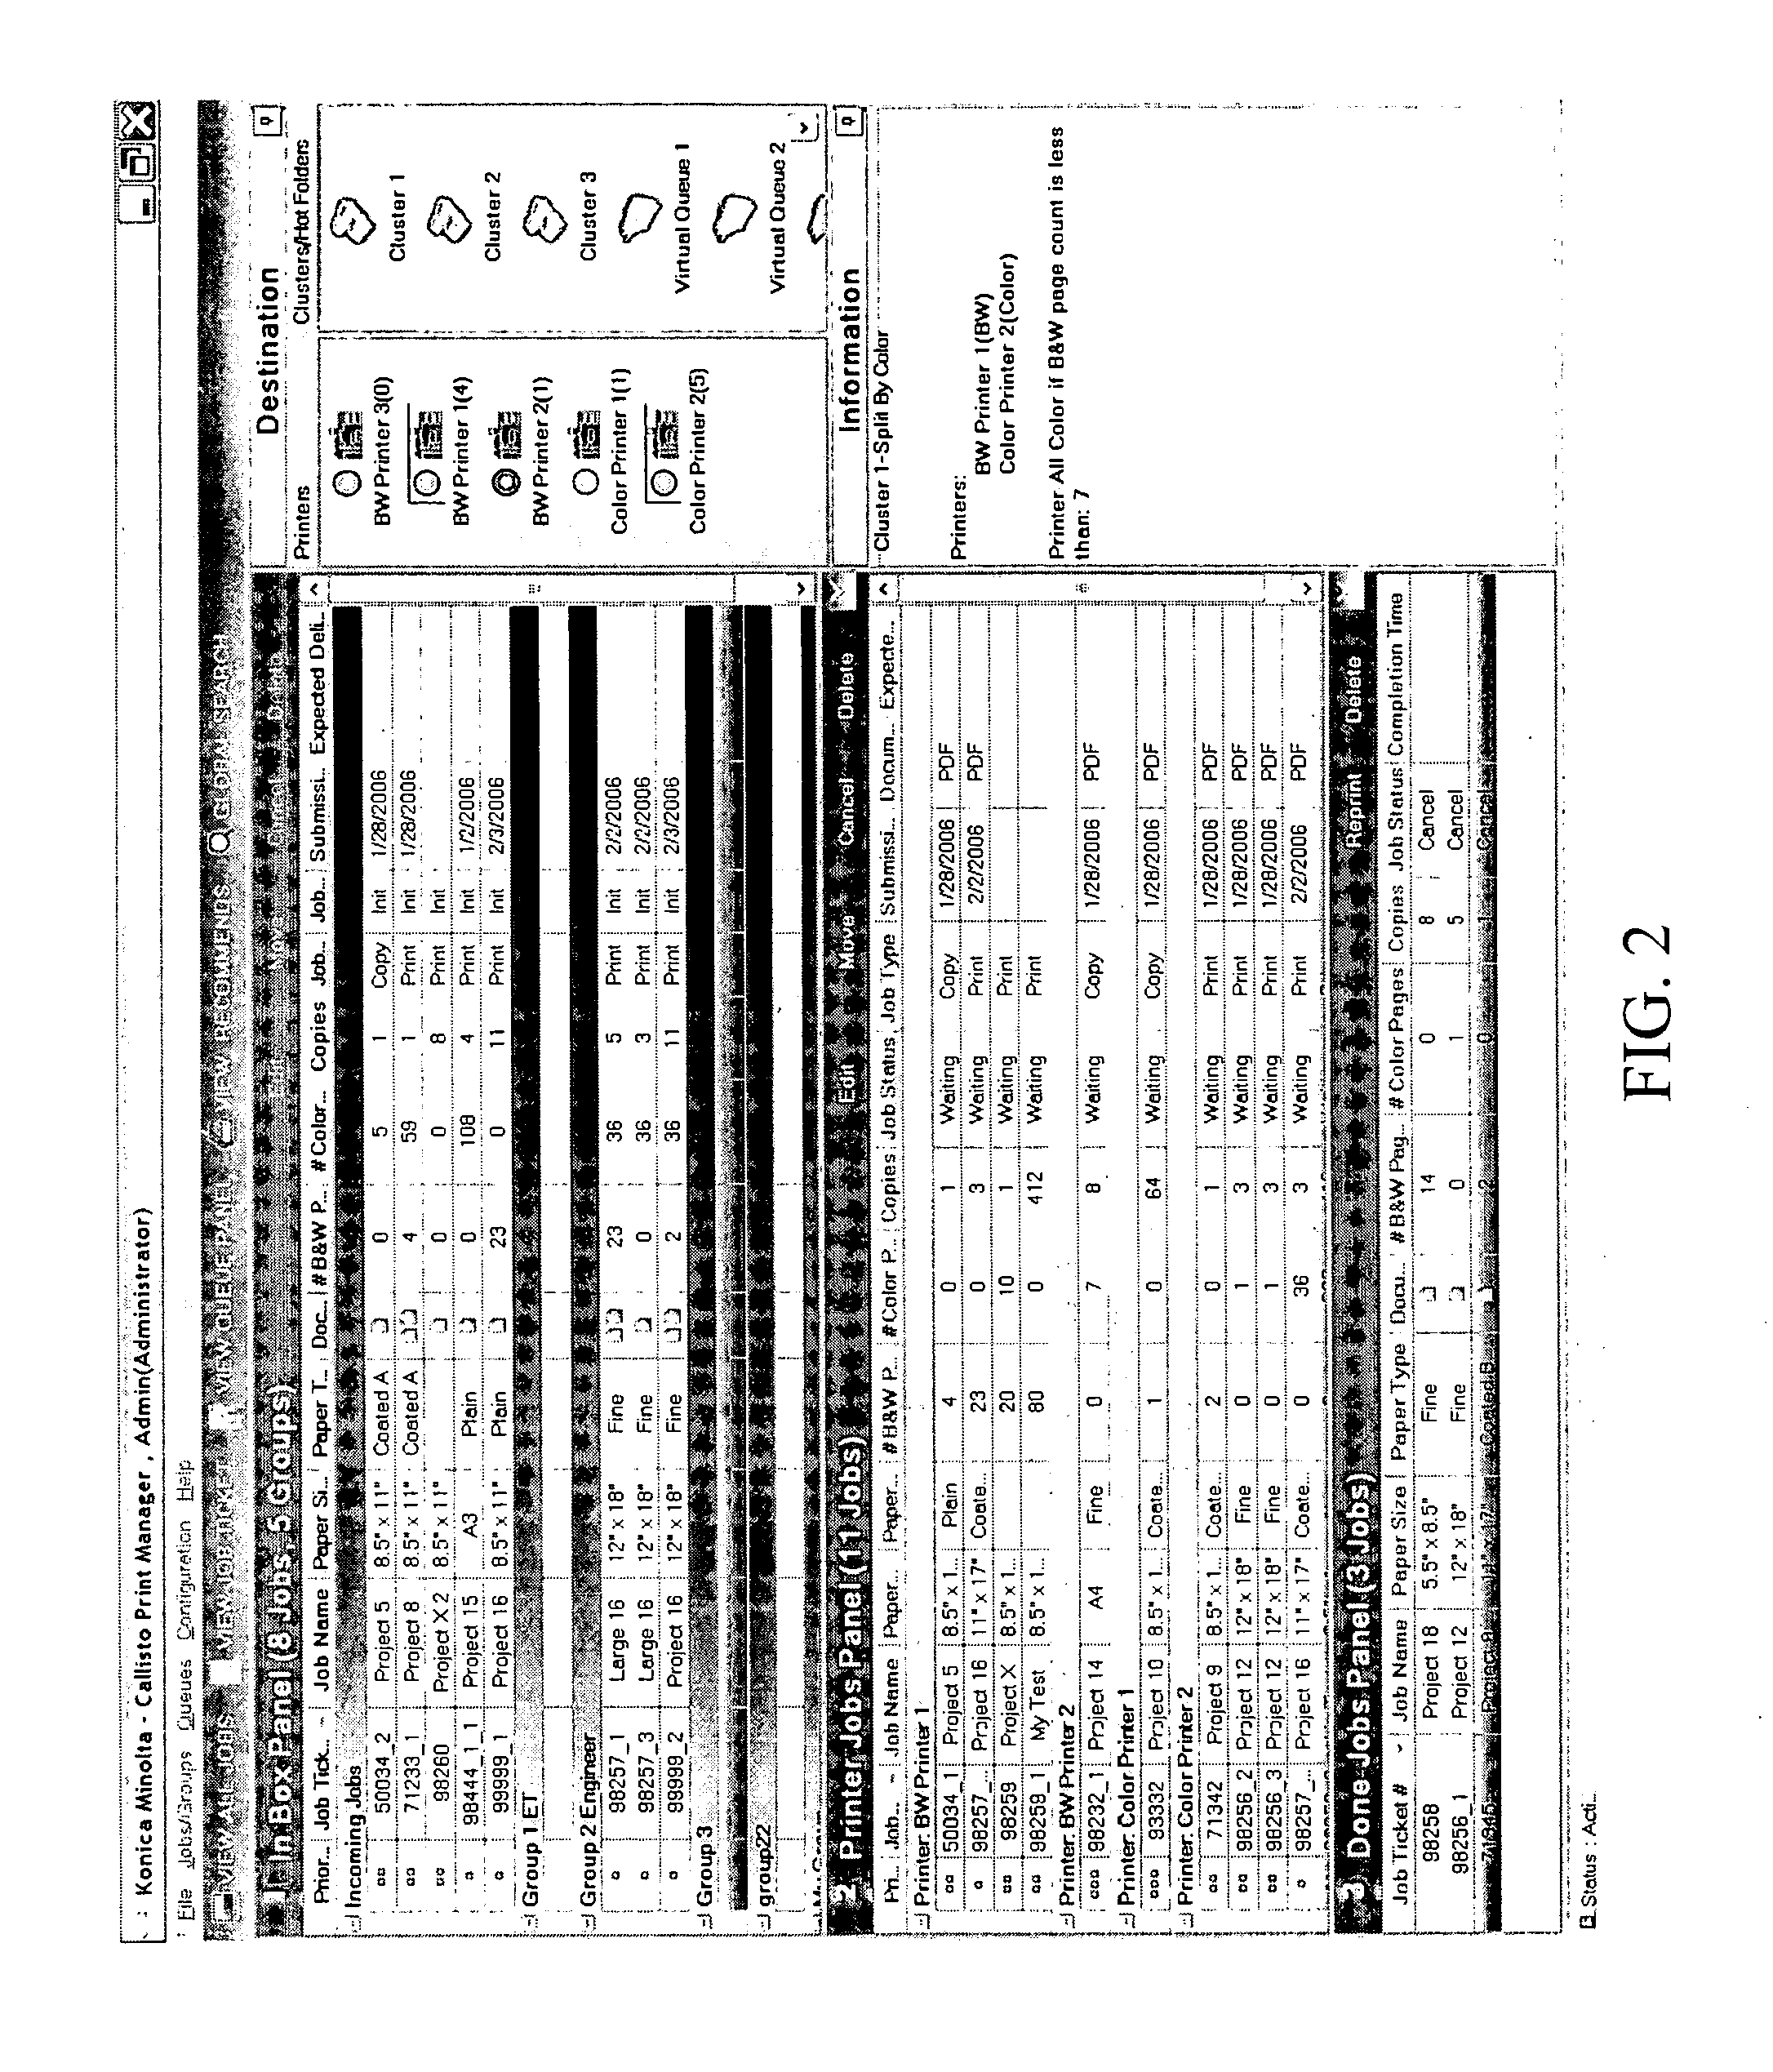 Print management method and apparatus with multiple views